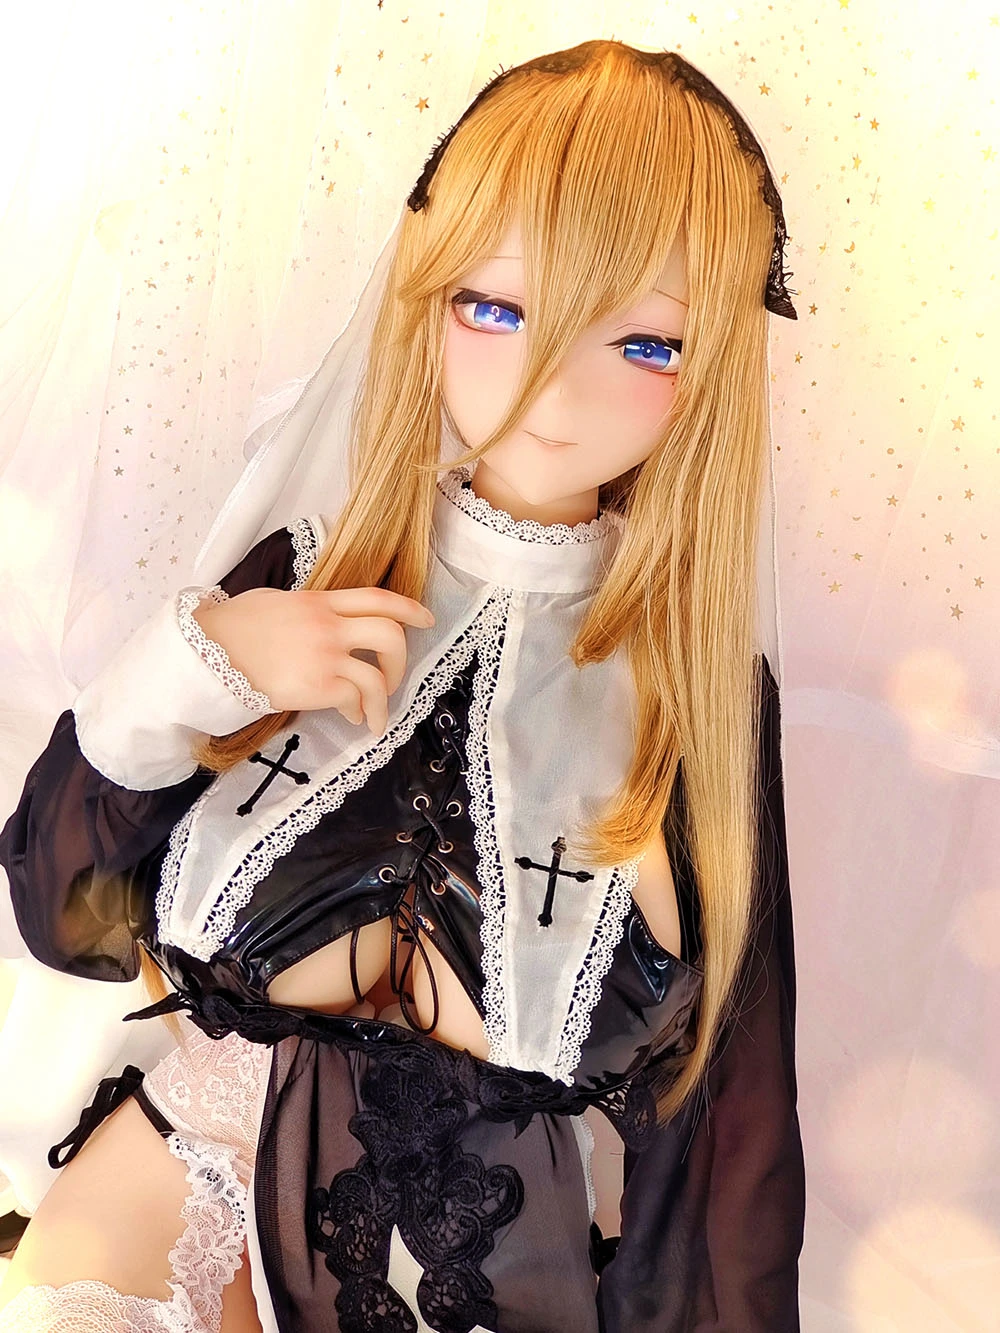 Apolonia sex doll collapse 3rd Aponia cosplay life-size doll 155cm H cup